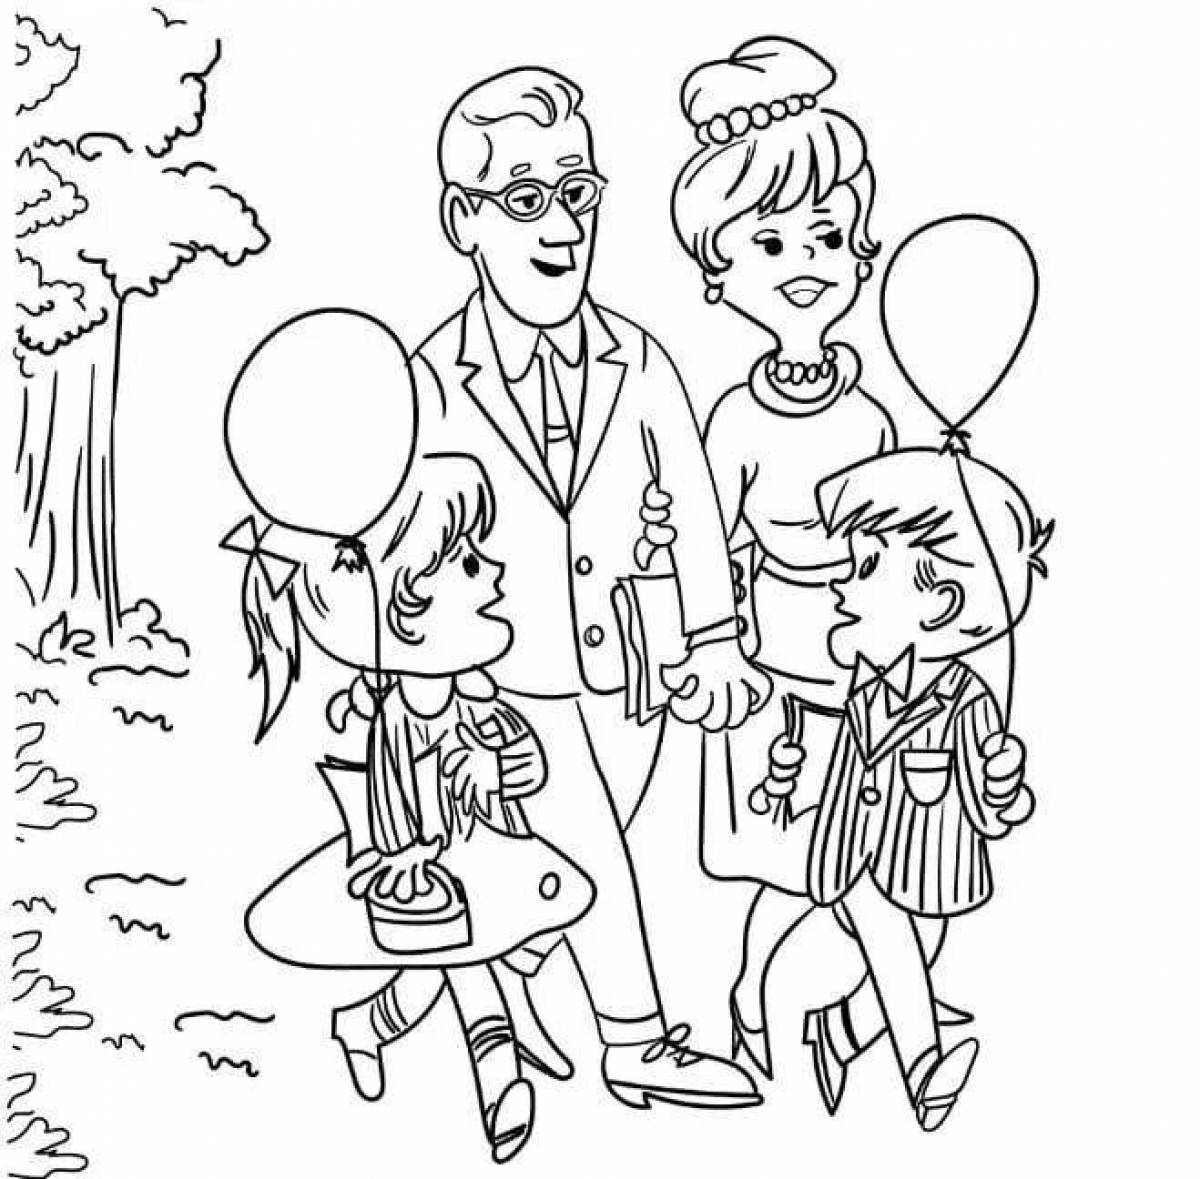 A fun family coloring book for kids